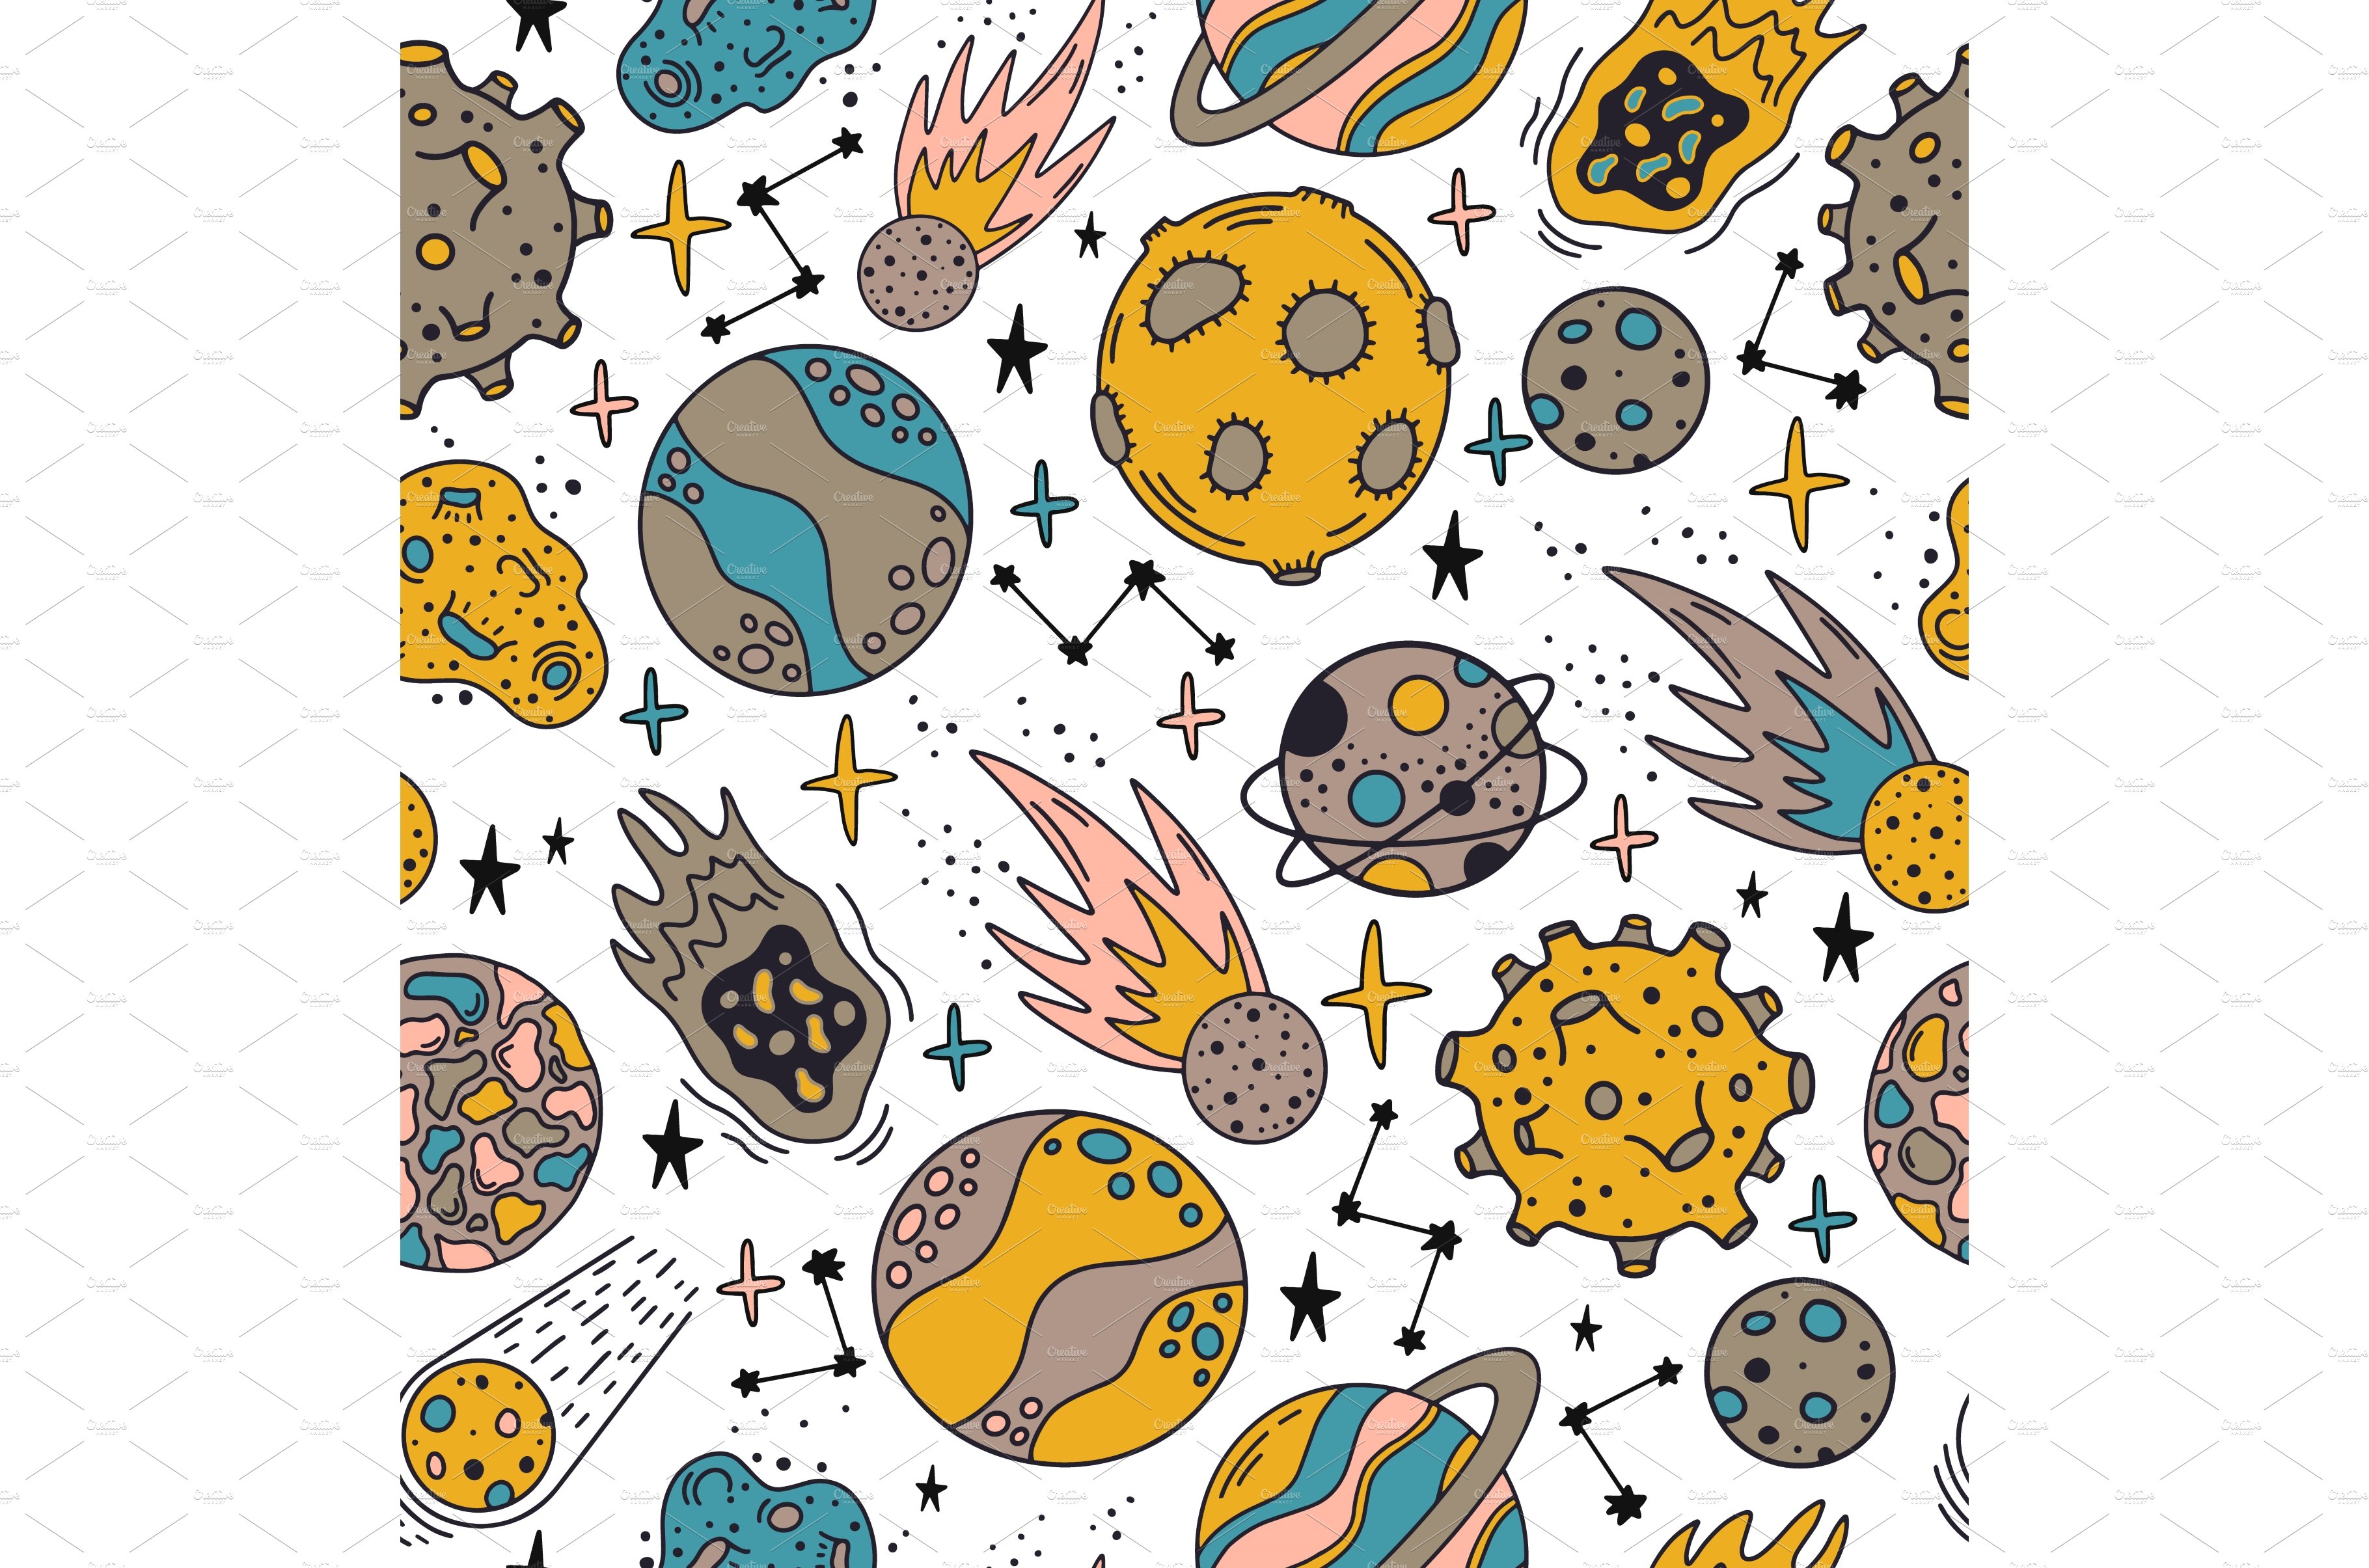 Space planets pattern. Cute hand cover image.